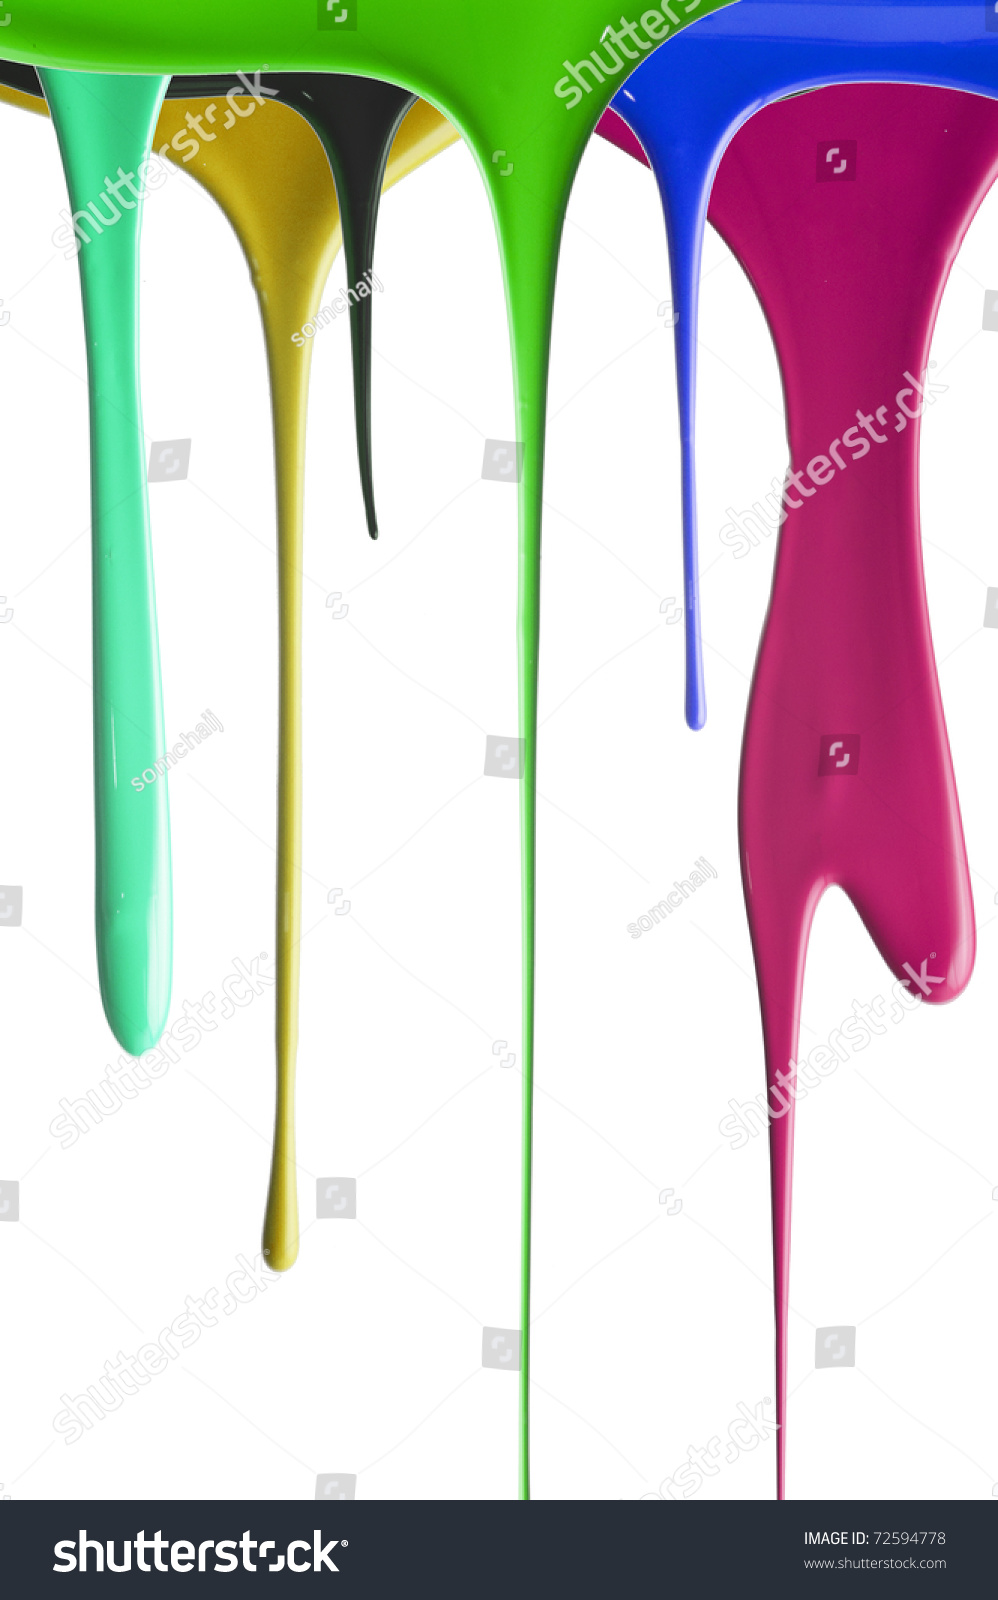 Dripping Paint Multiple Colors Stock Photo 72594778 - Shutterstock